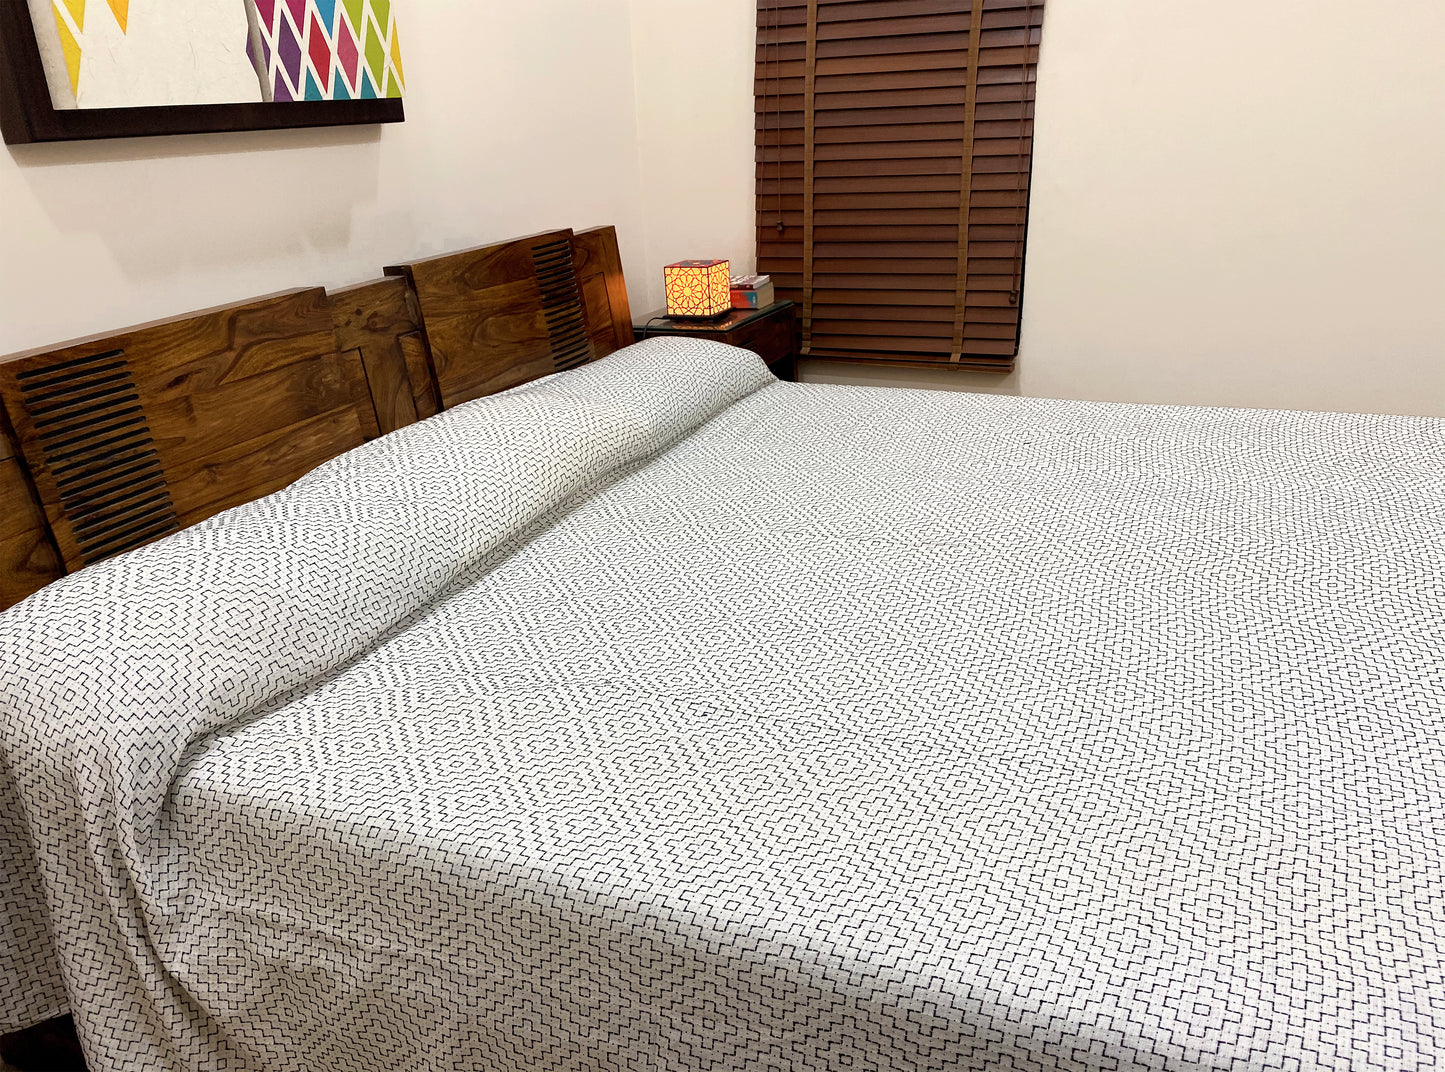 Woven Black & White Patterned Bed Cover